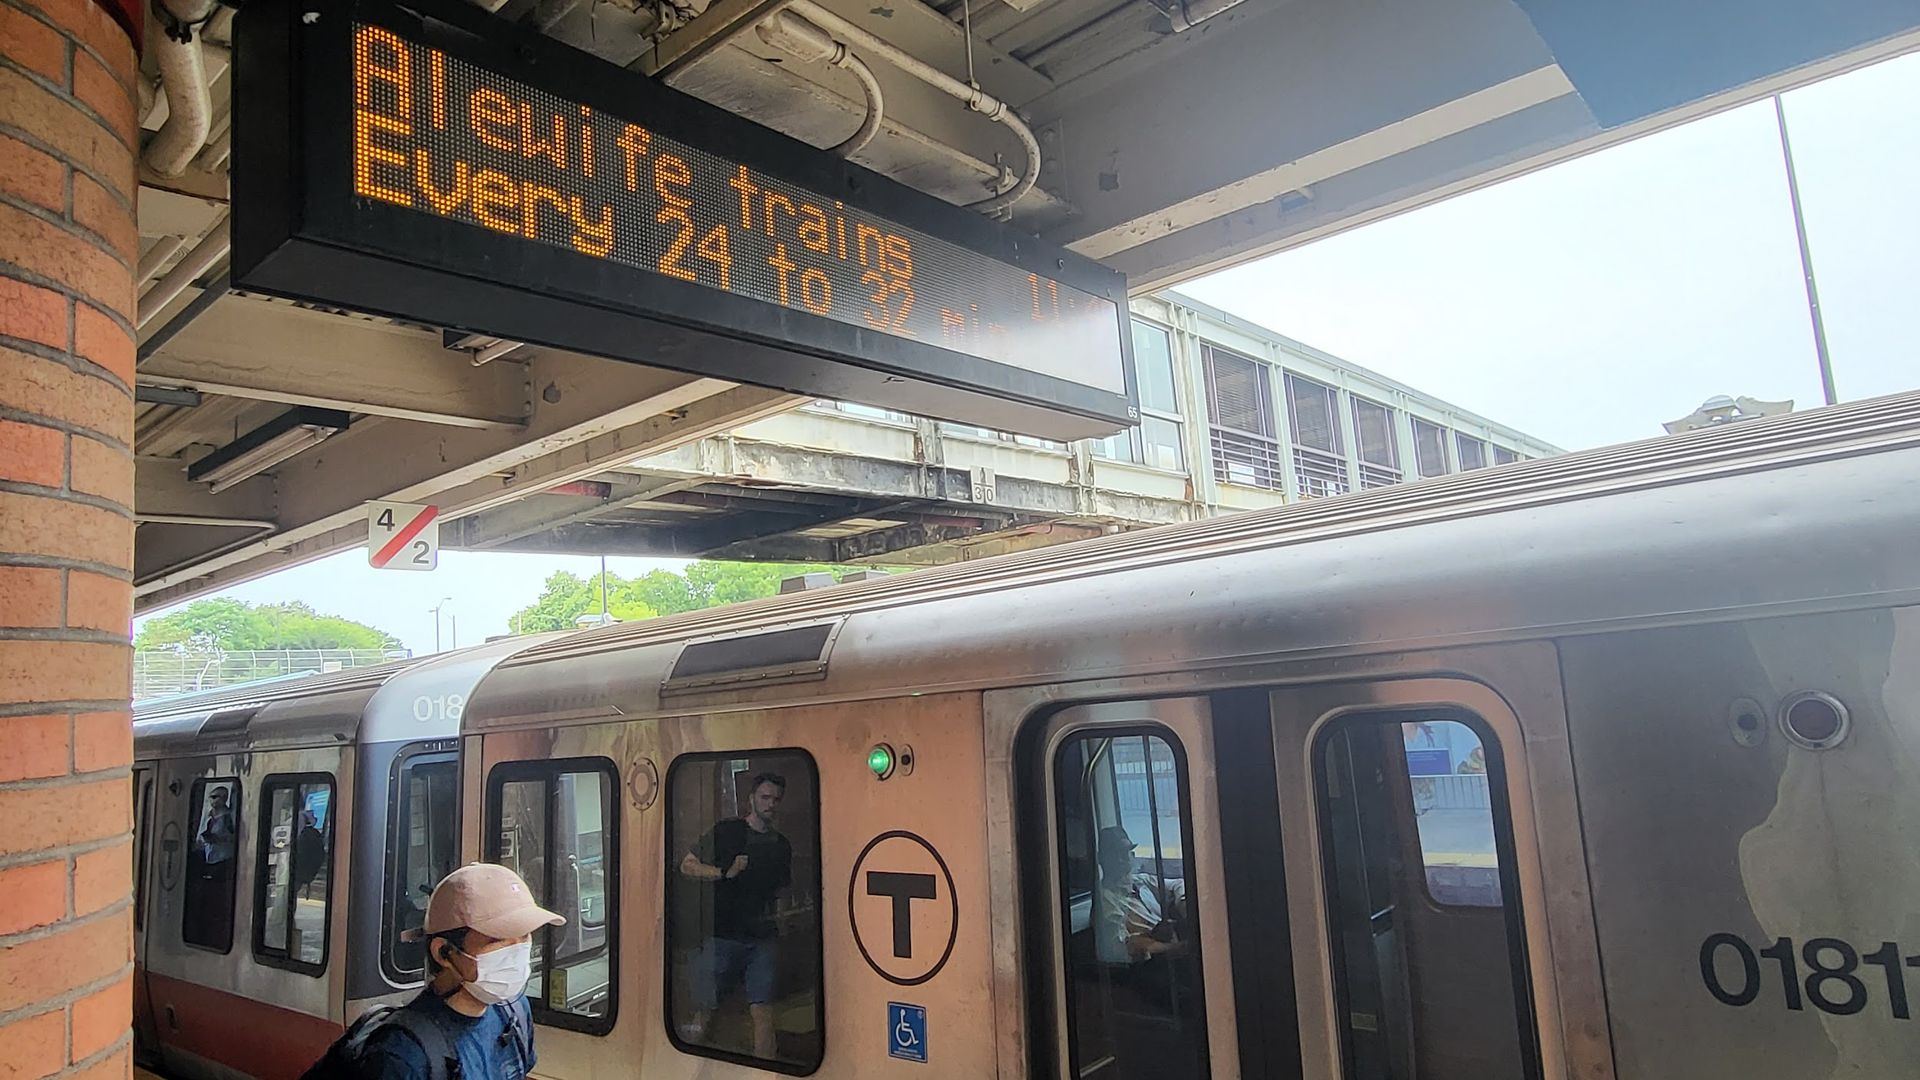 The countdown sign for an MBTA train showing a delay of 24 minutes.